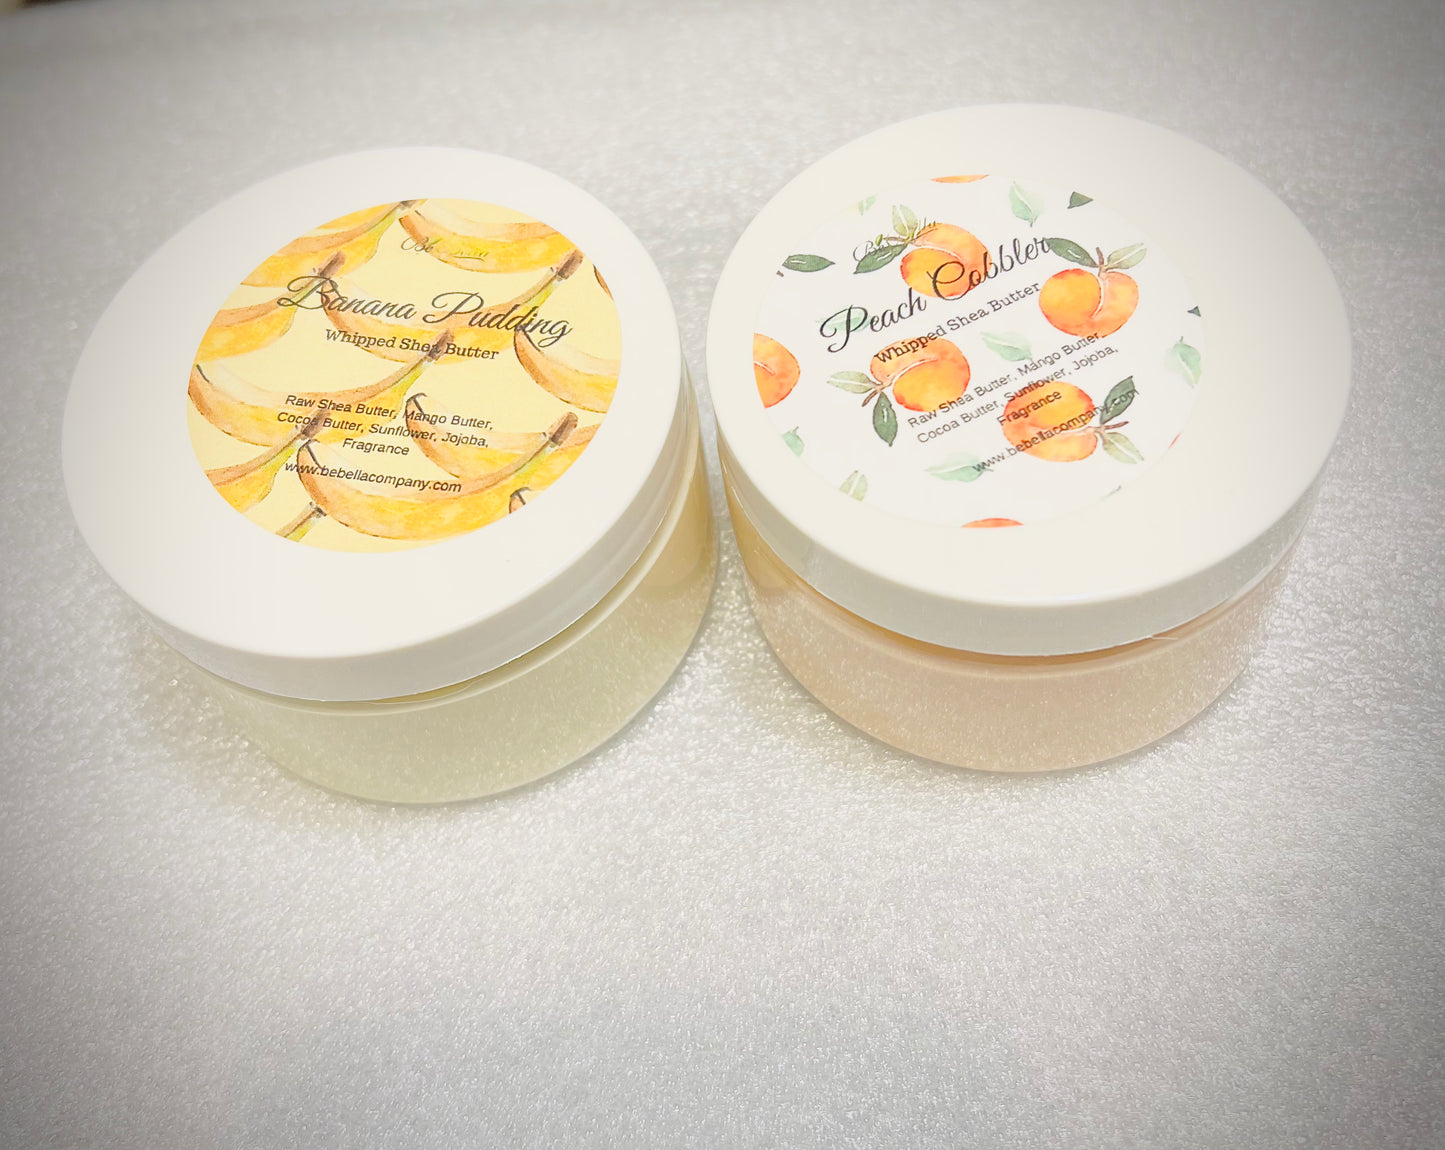 Peach Cobbler And Banna Pudding Whipped Shea Butter Limited Edition